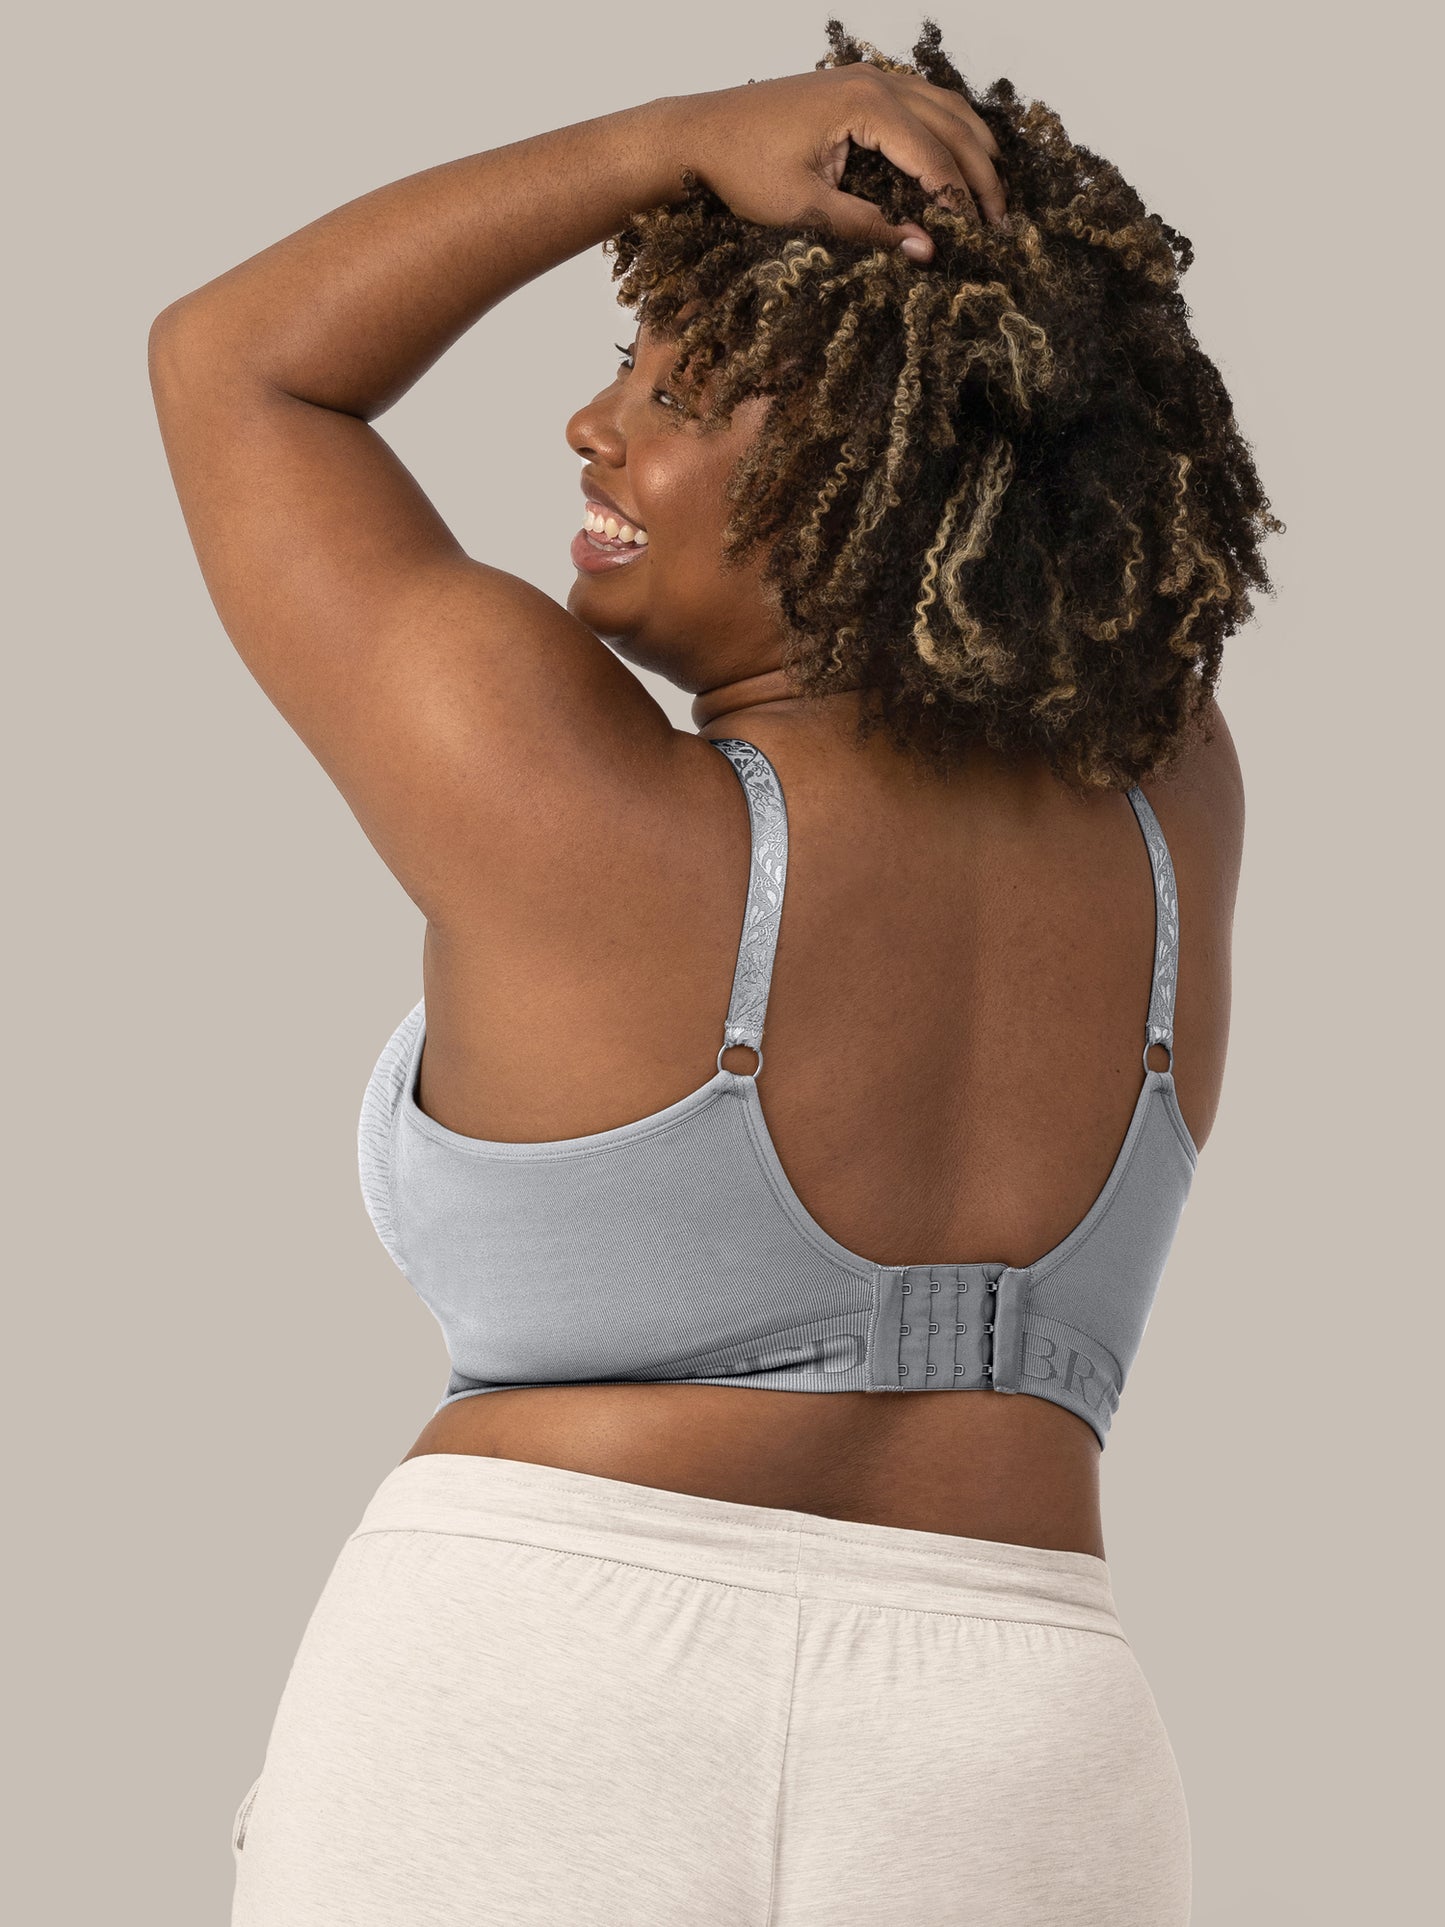 The back of a model wearing the Sublime® Hands-Free Pumping & Nursing Bra in Grey